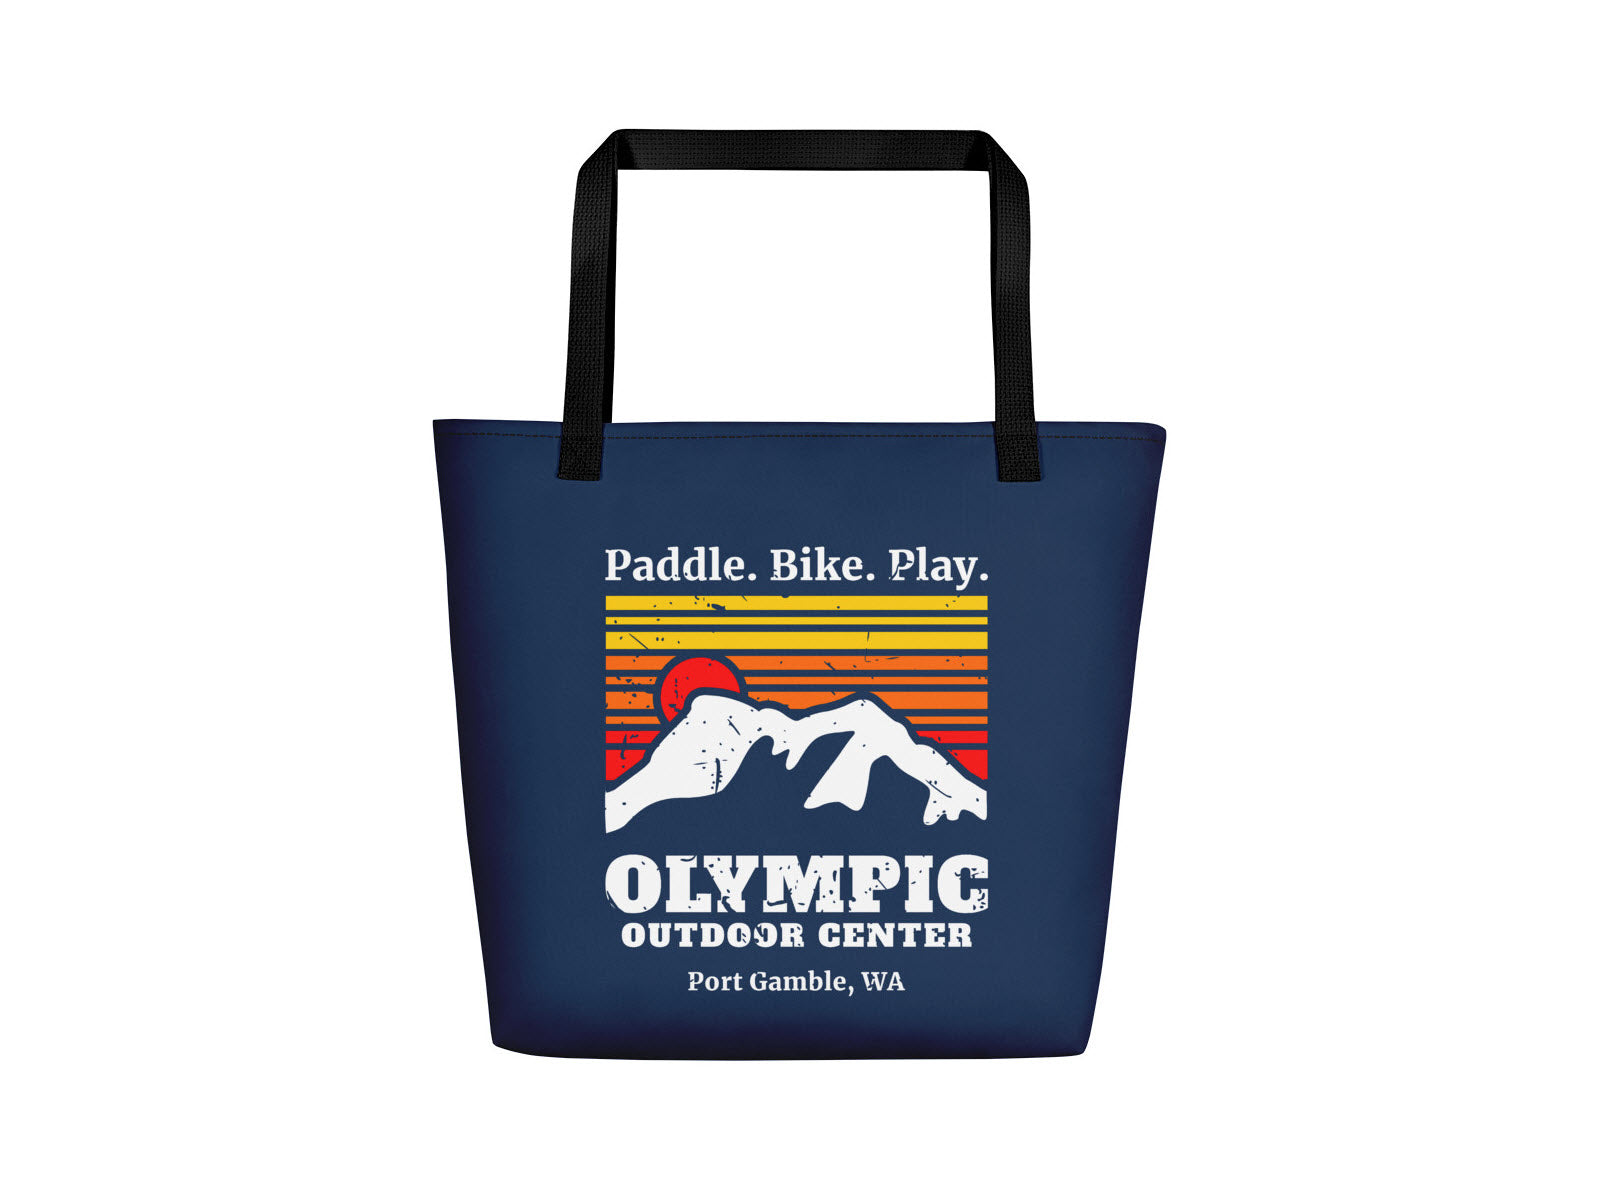 Olympic Outdoor Center Paddle. Bike. Play. Beach Bag